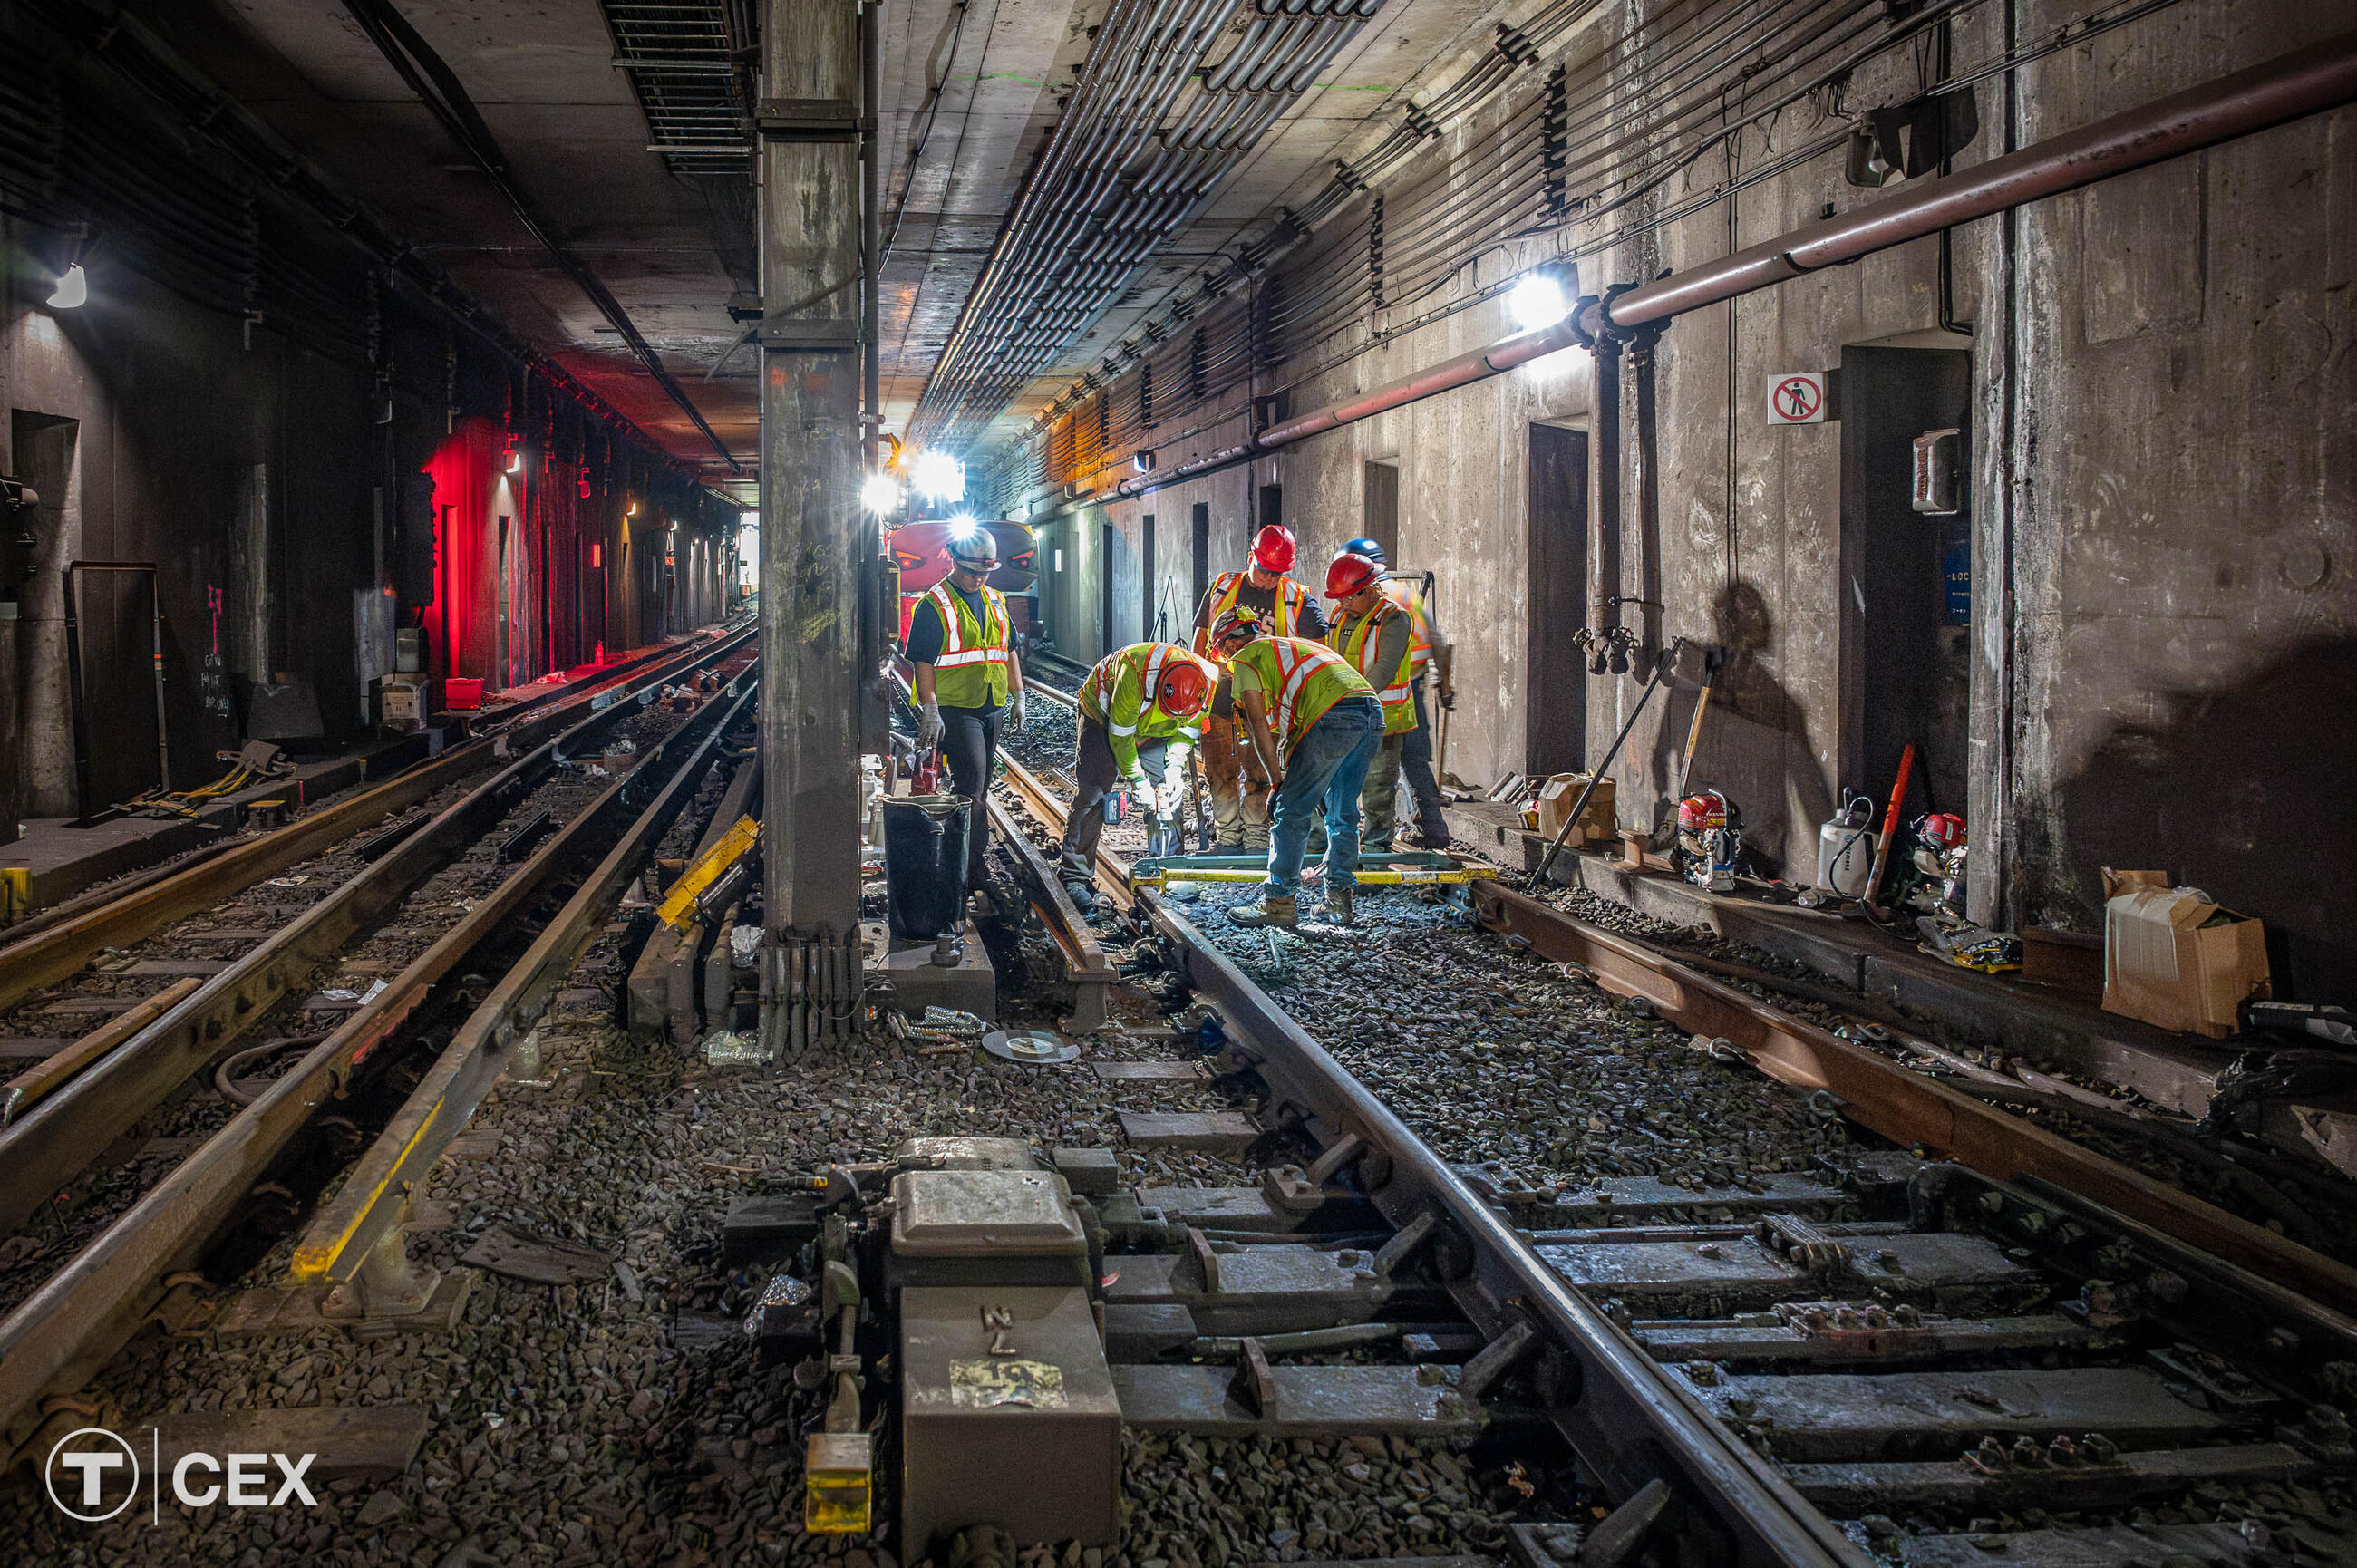 Crews performed track work and more along the Orange Line. Complimentary photo by the MBTA Customer and Employee Experience Department.